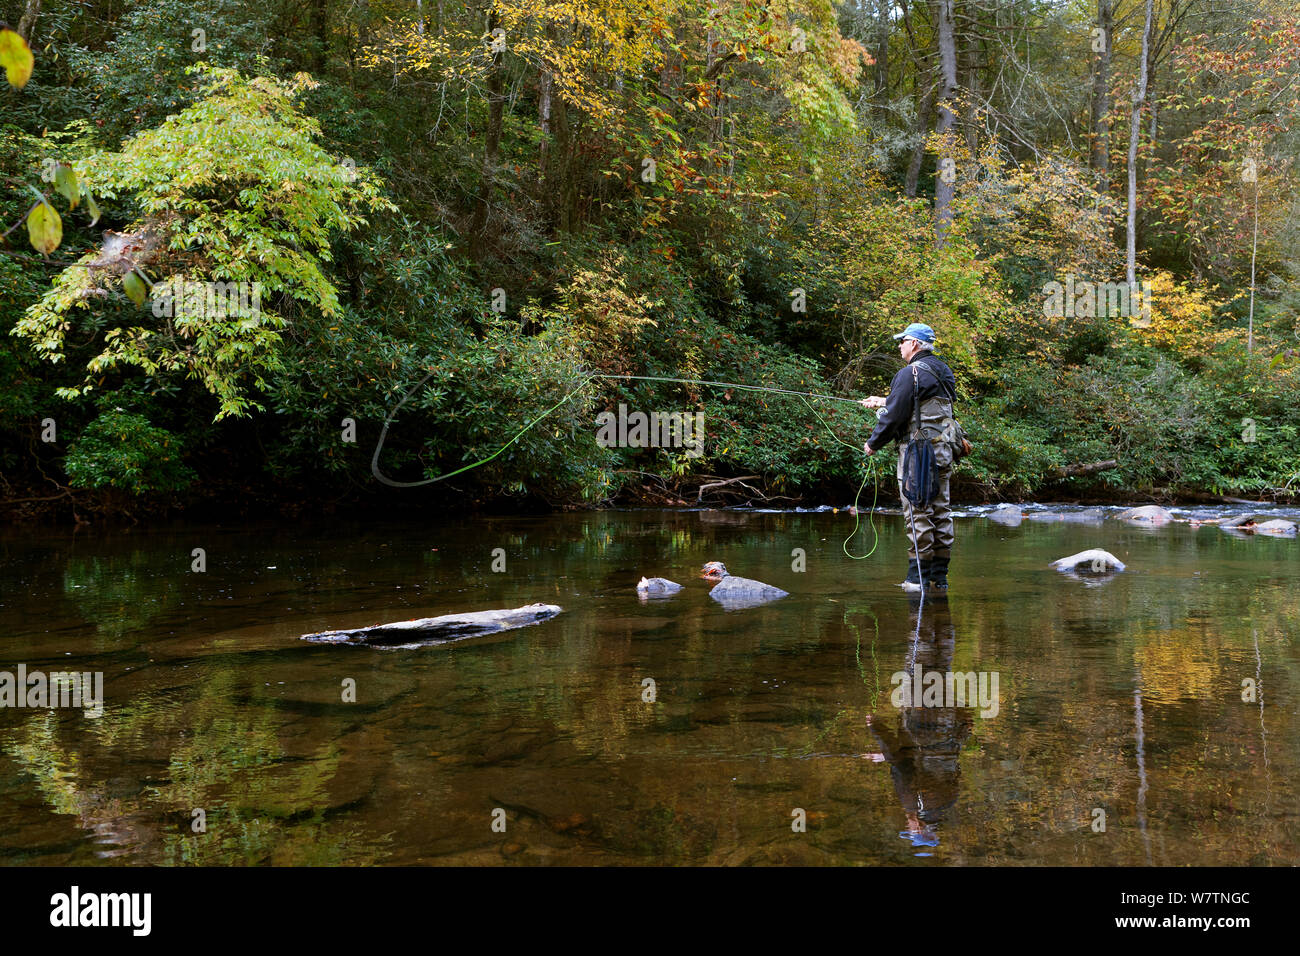 Alan McDonald  fishing below Hooker Falls in the DuPont State Forest, Transylvania County, North Carolina, USA, October 2013. Model released. Stock Photo